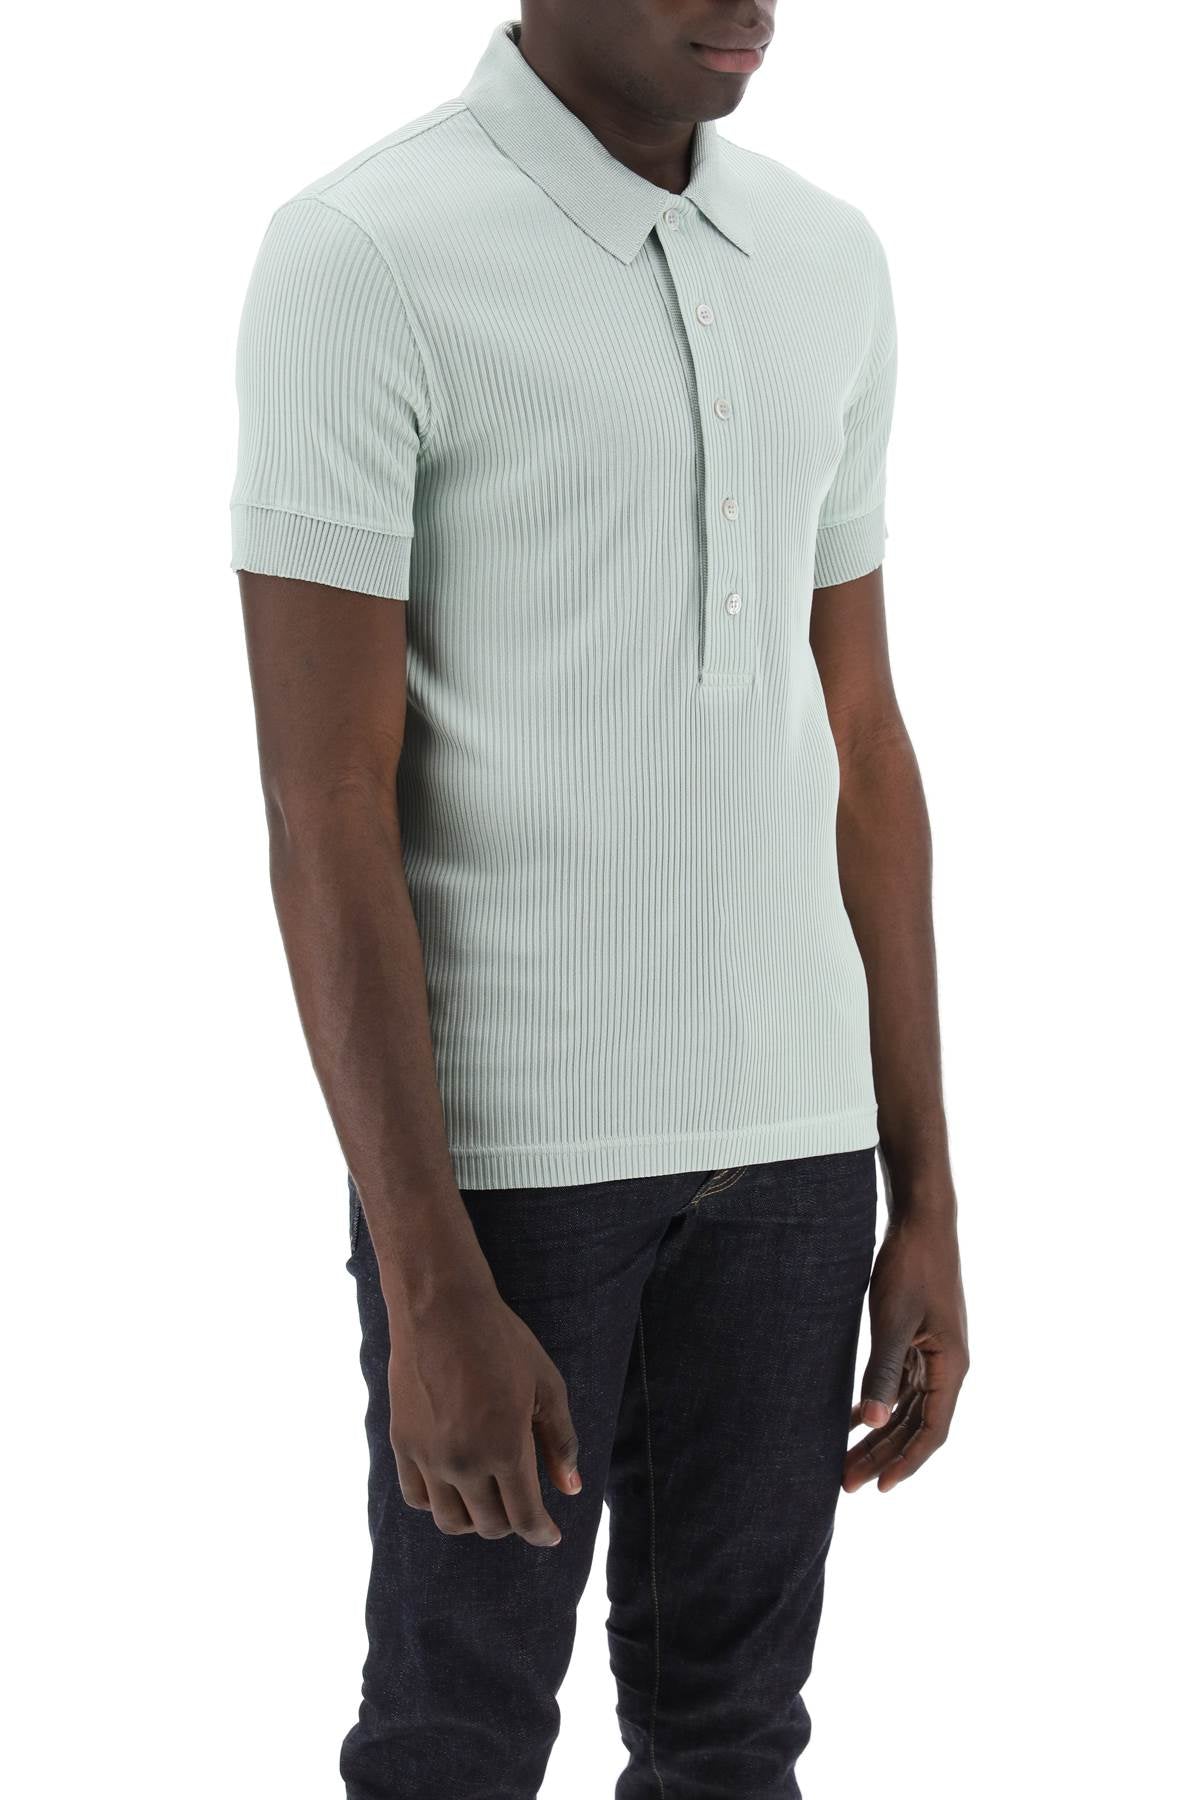 Tom ford "ribbed knit polo with shiny-1